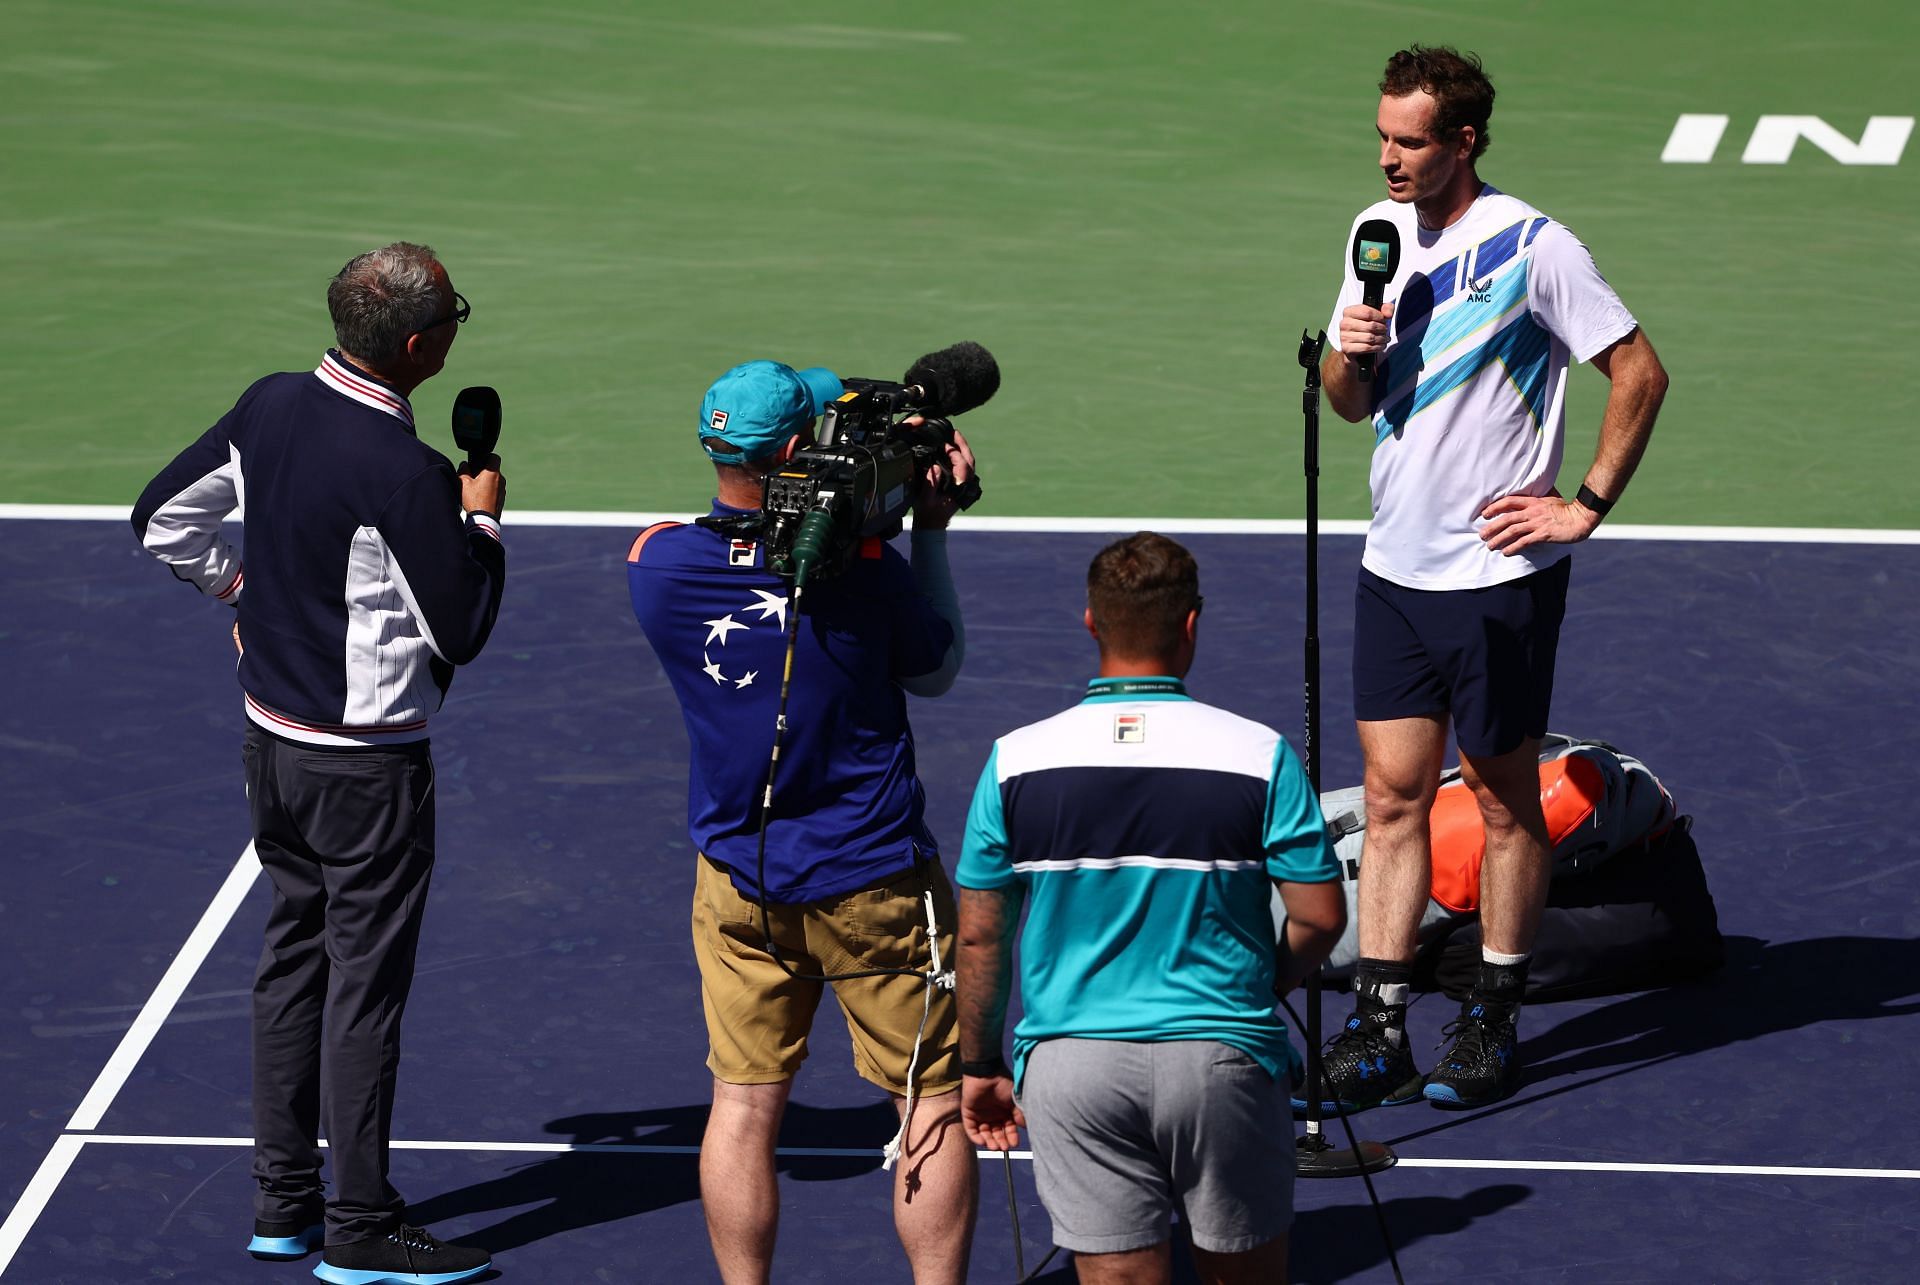 Murray after his 700th win at the 2022 BNP Paribas Open.